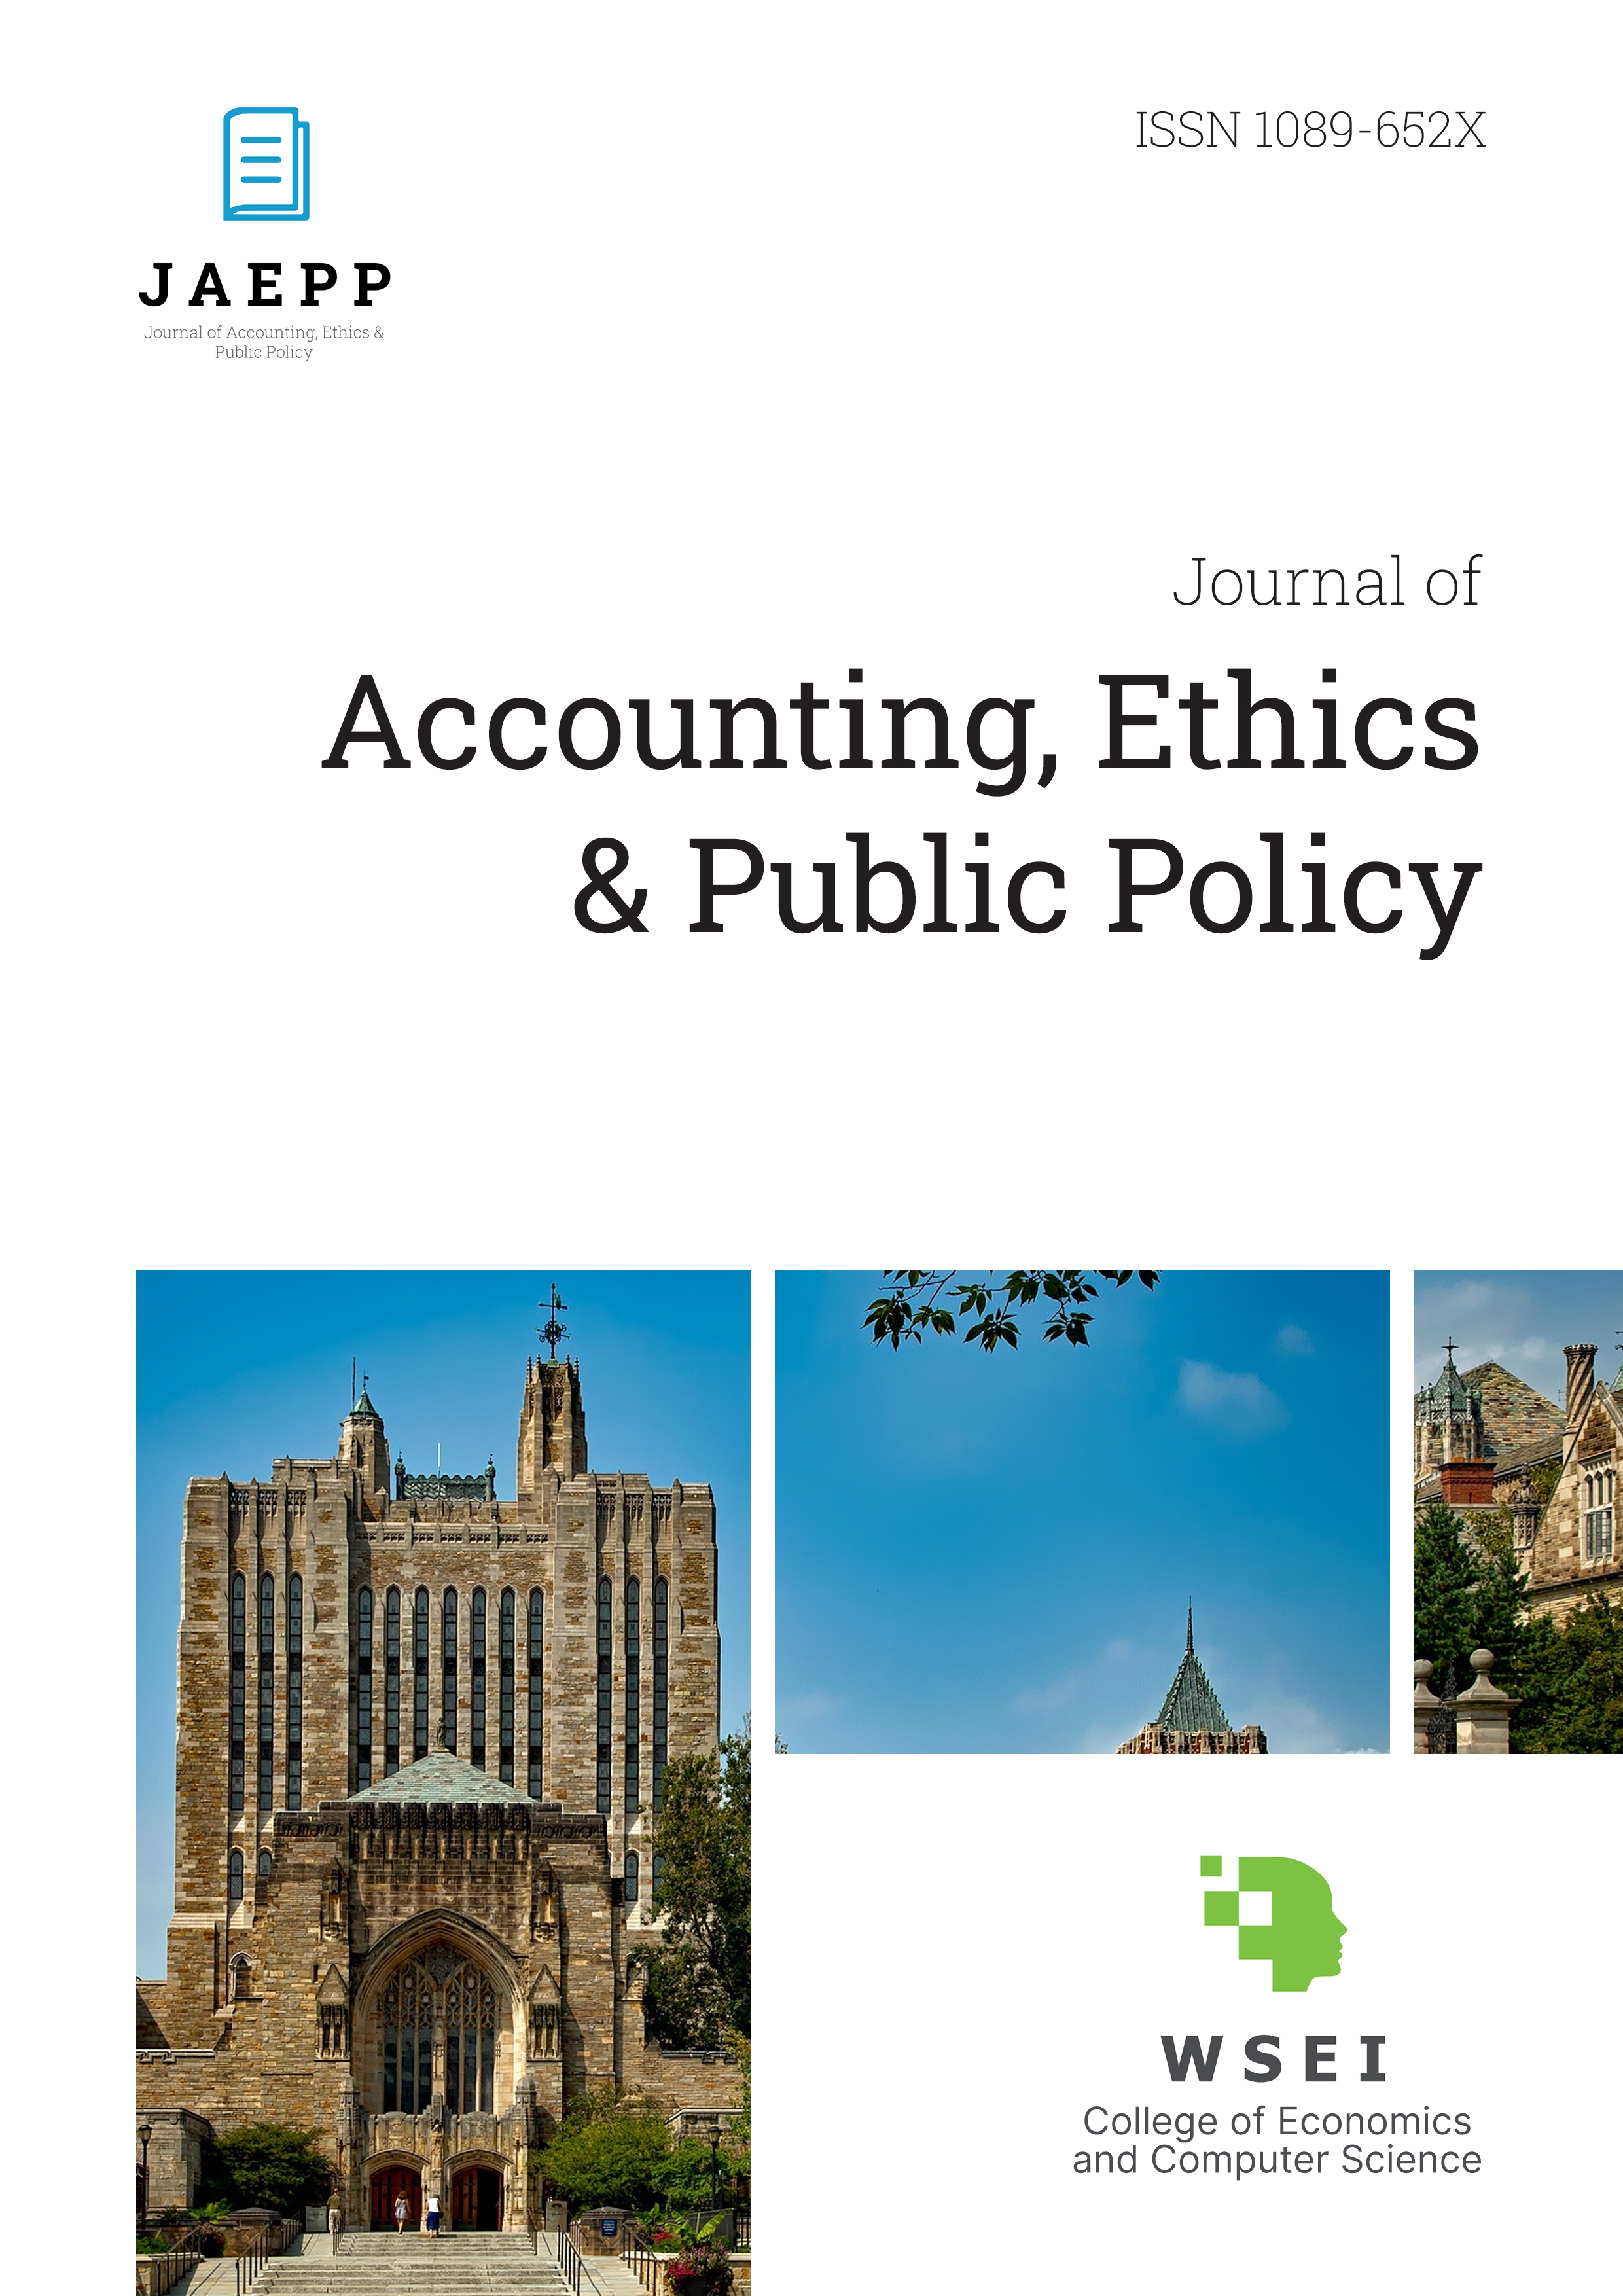 					View Vol. 22 No. 2 (2021): Journal of Accounting, Ethics & Public Policy, JAEPP
				